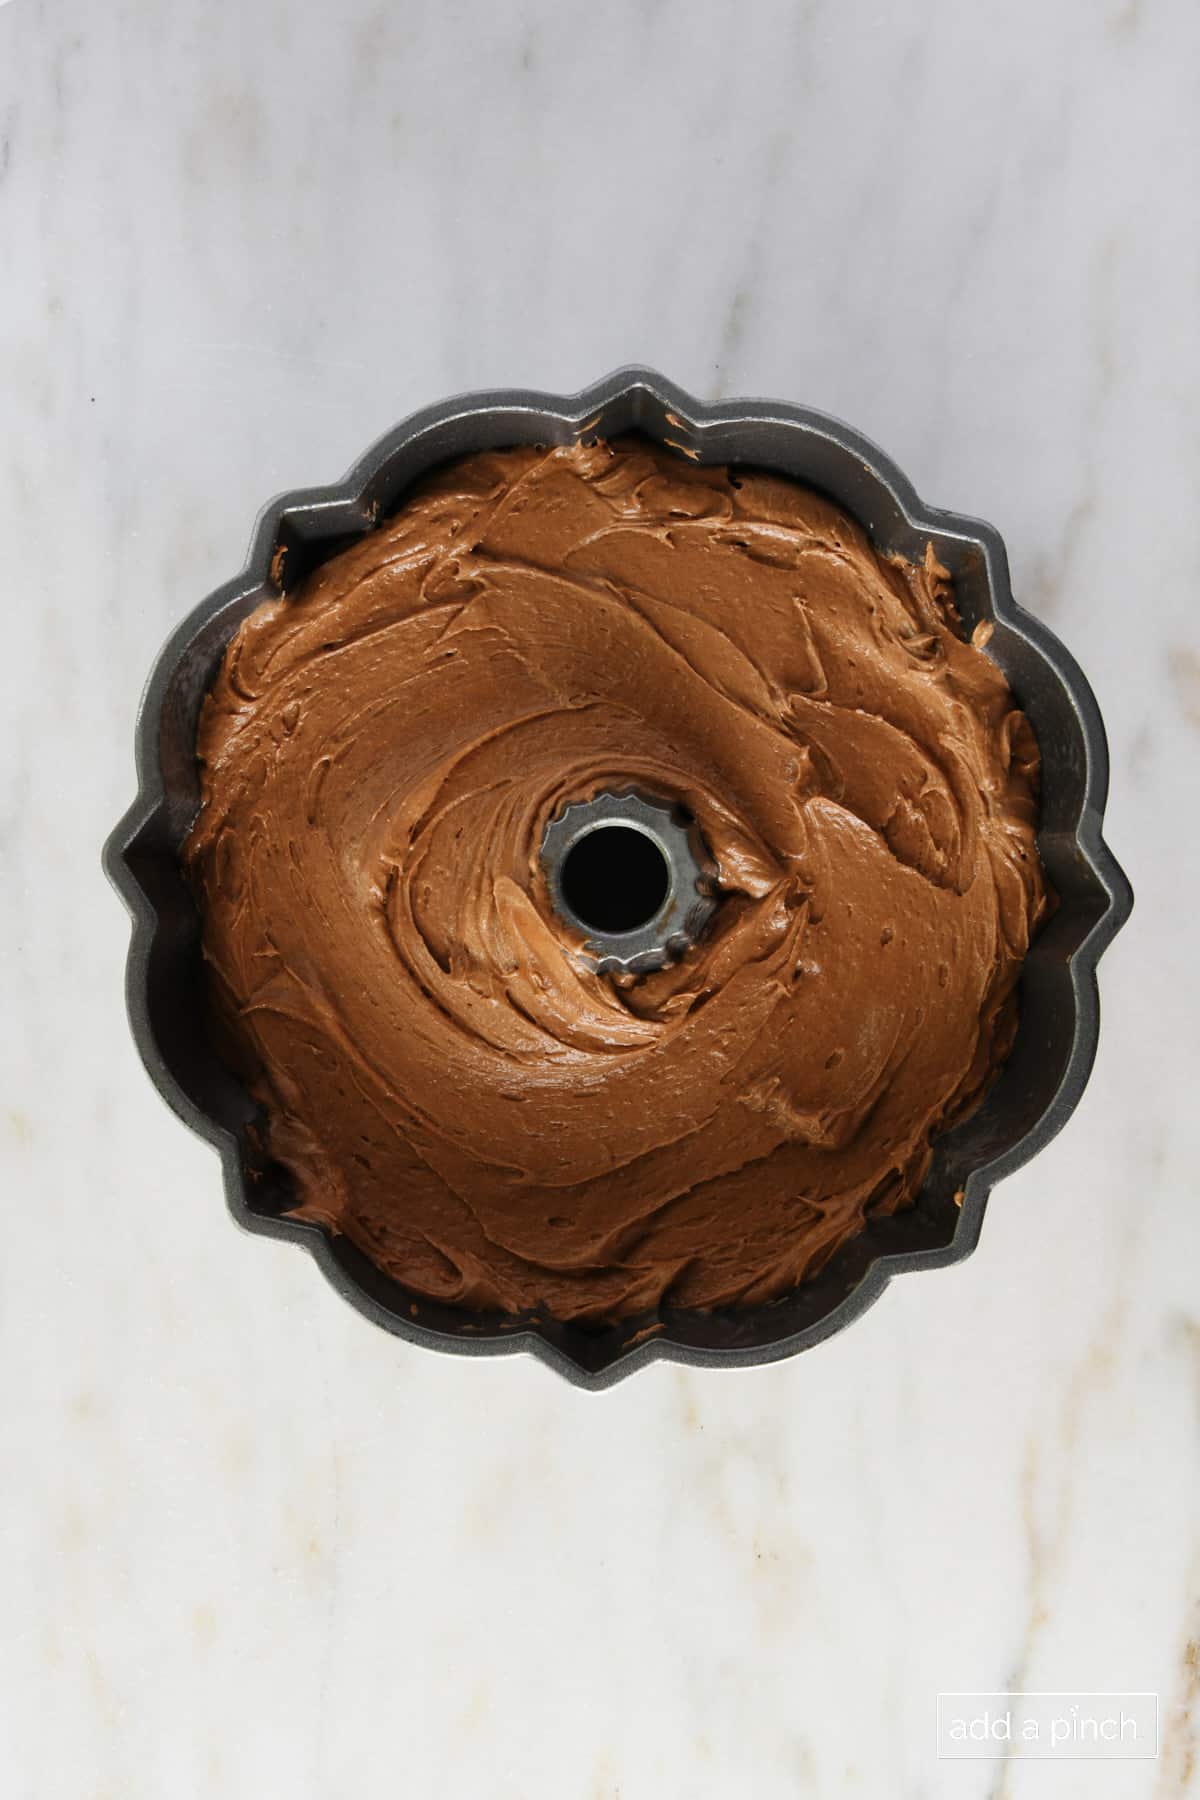 Chocolate pound cake batter in a bundt pan ready to bake.